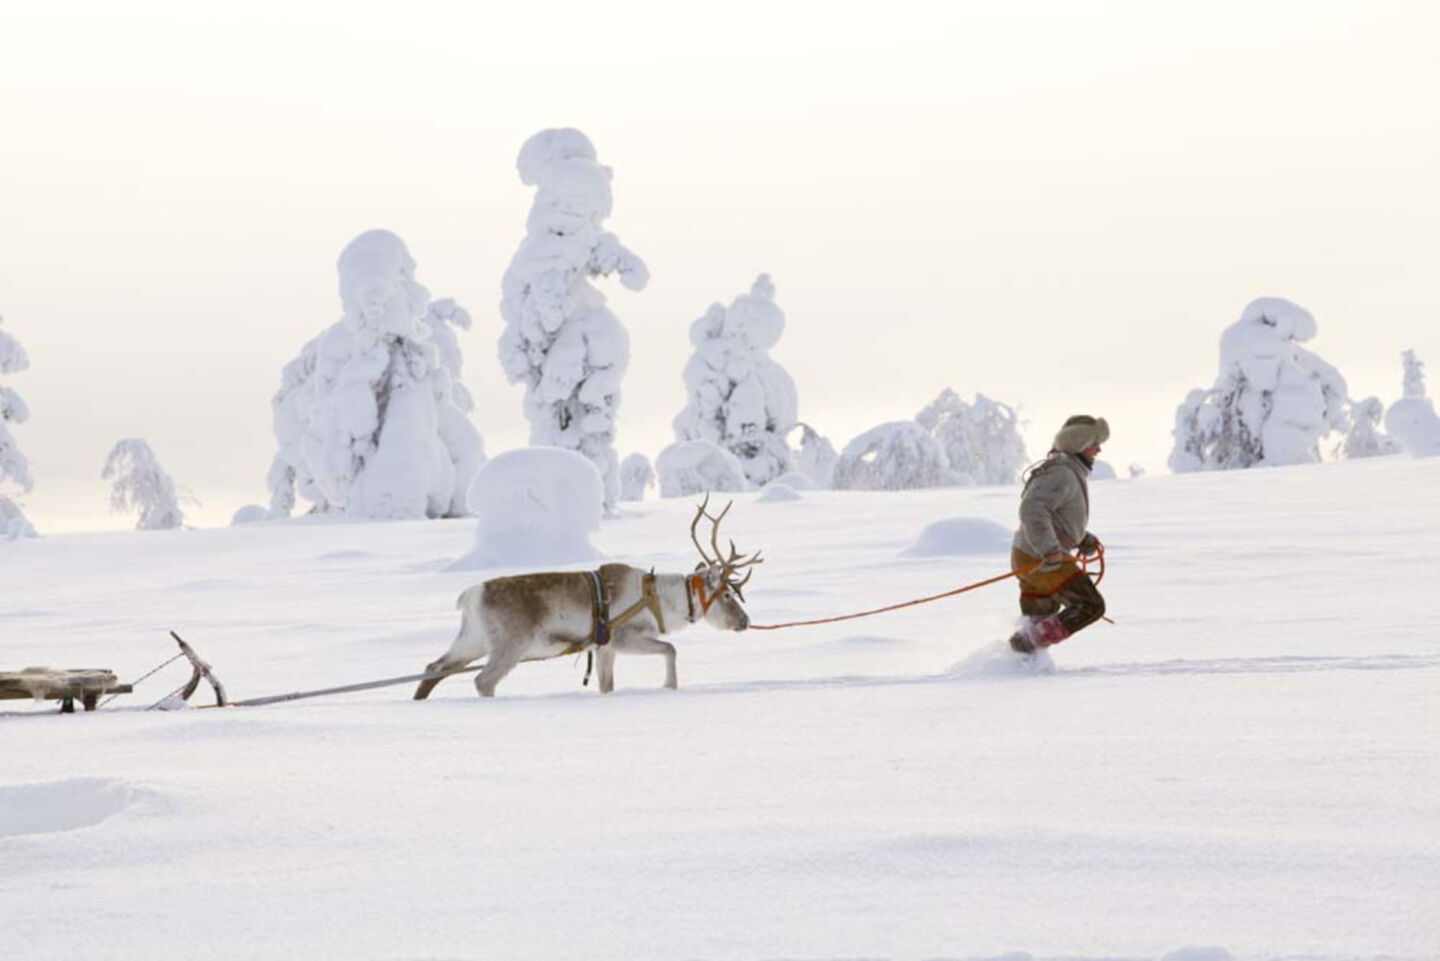 Arctic adventure - Pulling a reindeer through the snow in Pyhä-Luosto, Finland